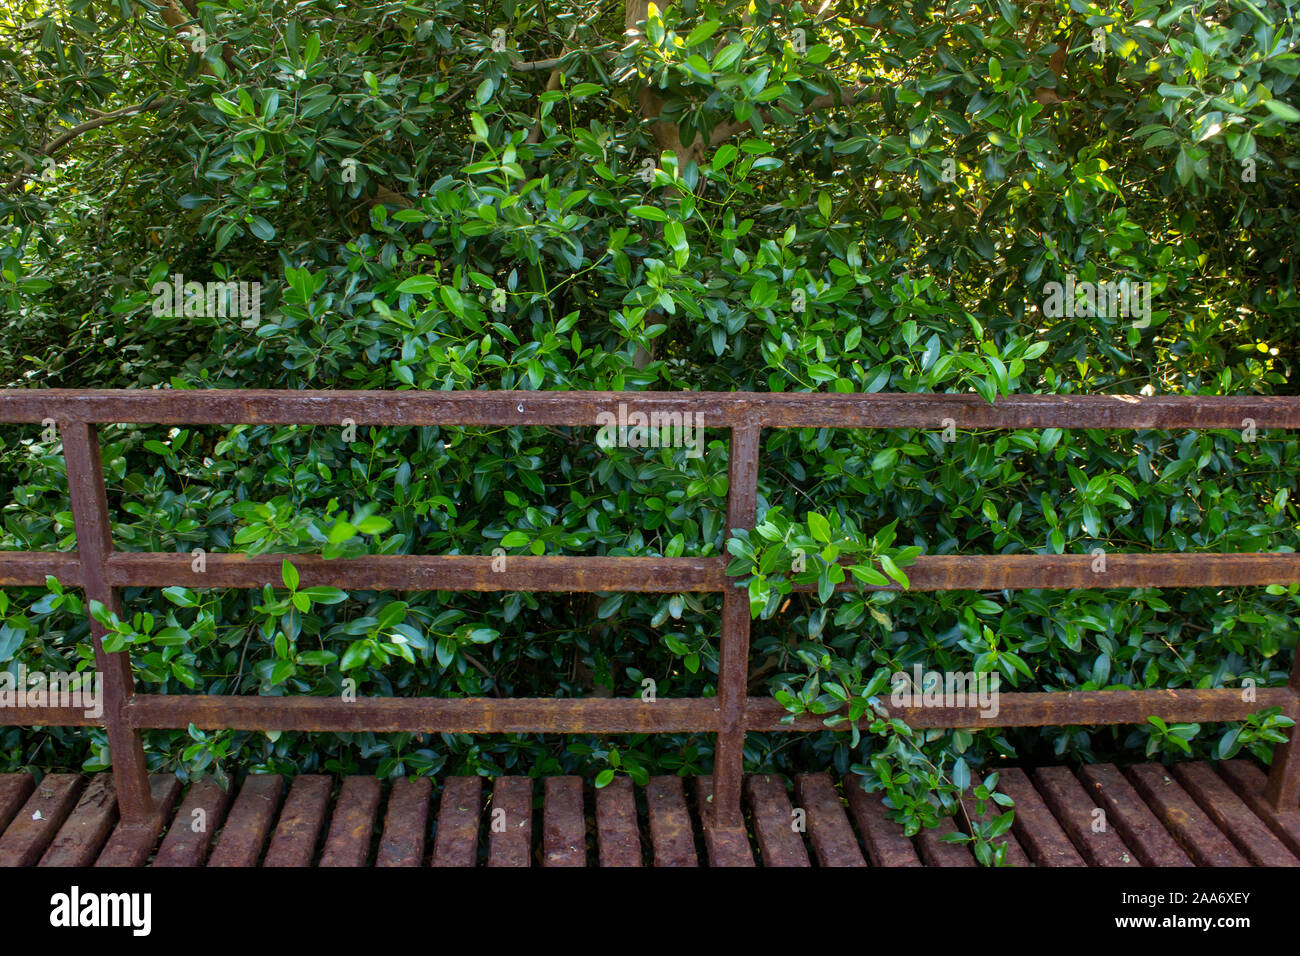 View of hand railings and bridge in a park, Chennai, India with vegetation in background Stock Photo